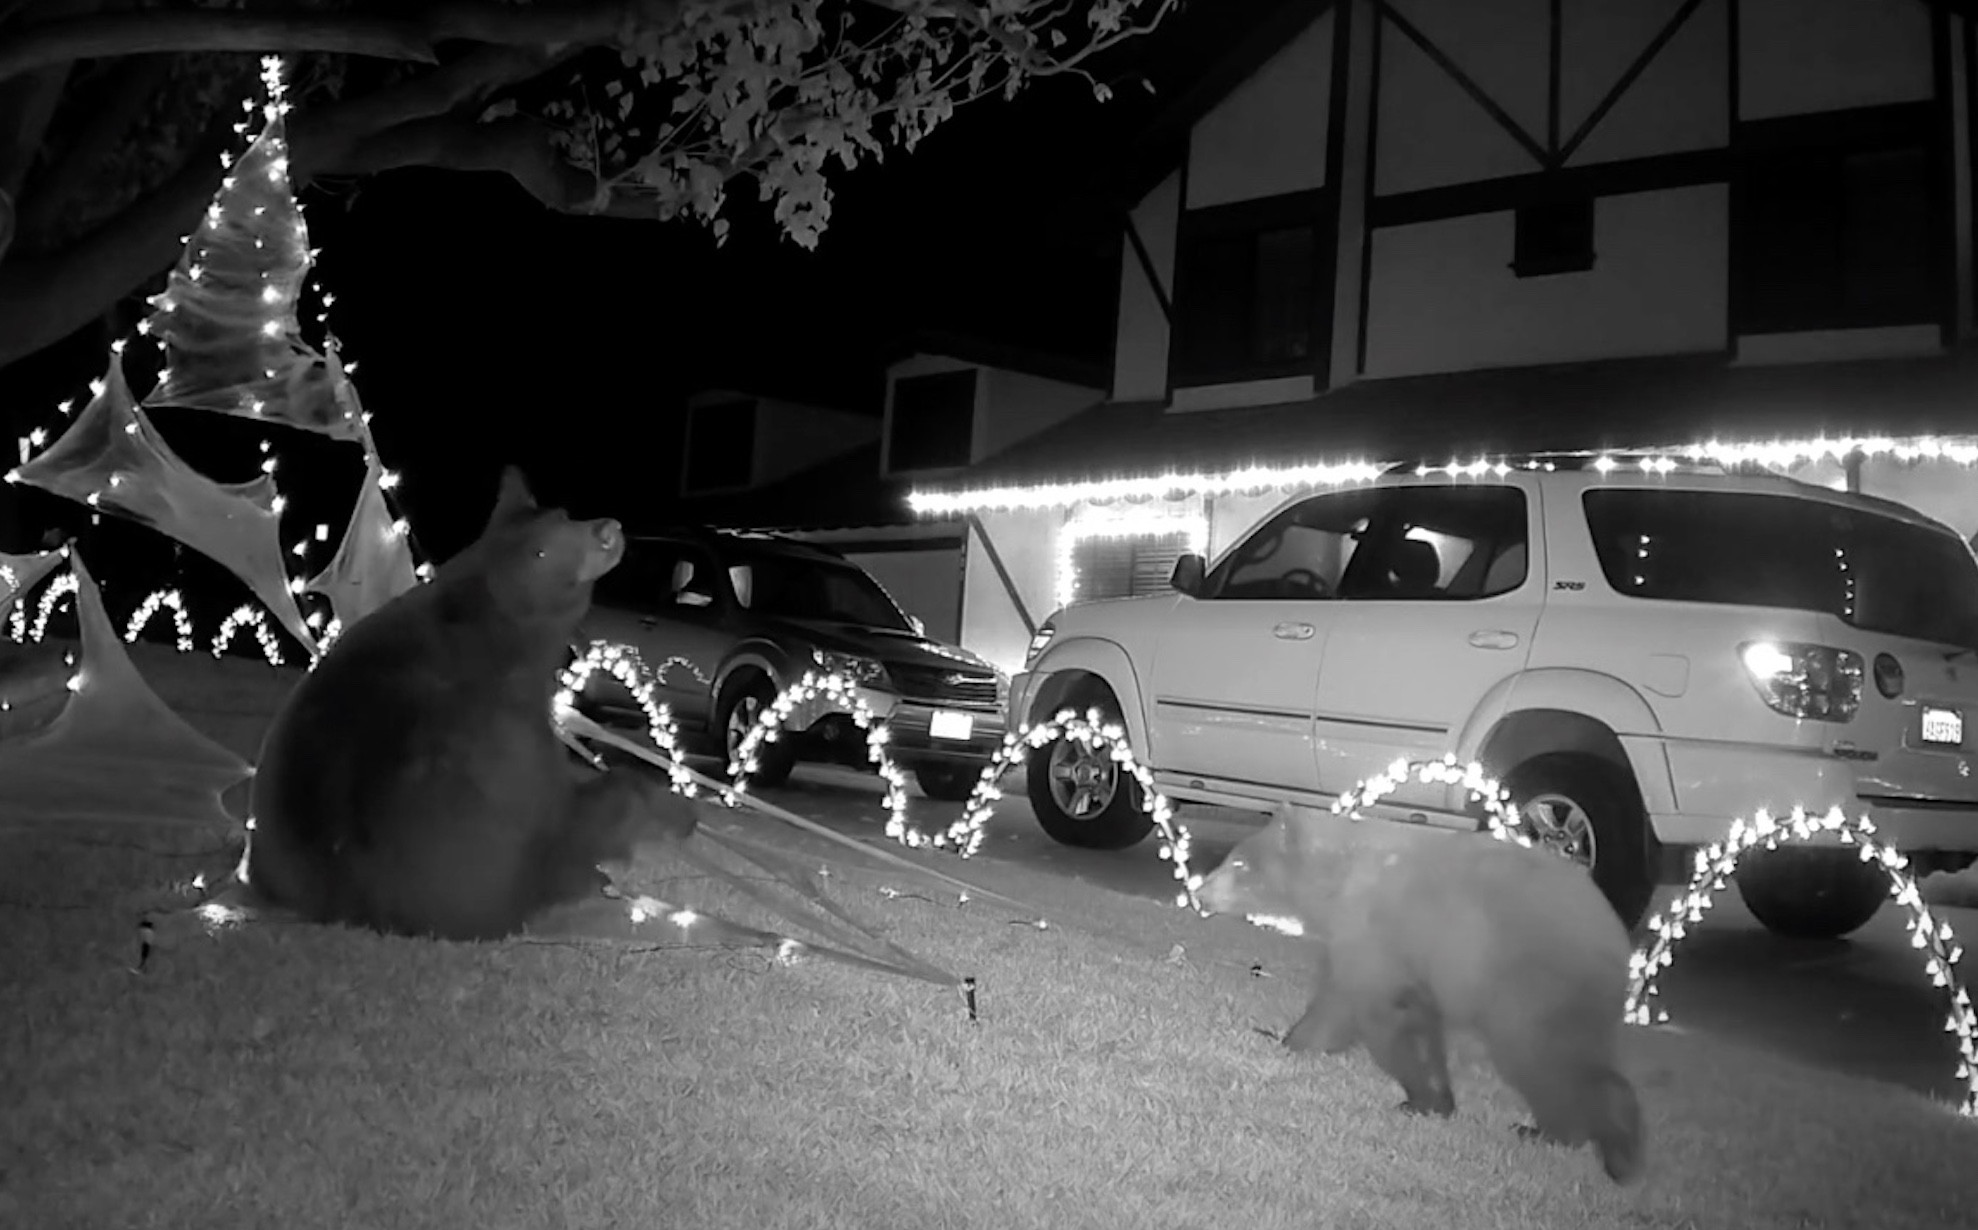 VIDEO: Mama Bear And Cubs Destroy Halloween Decorations